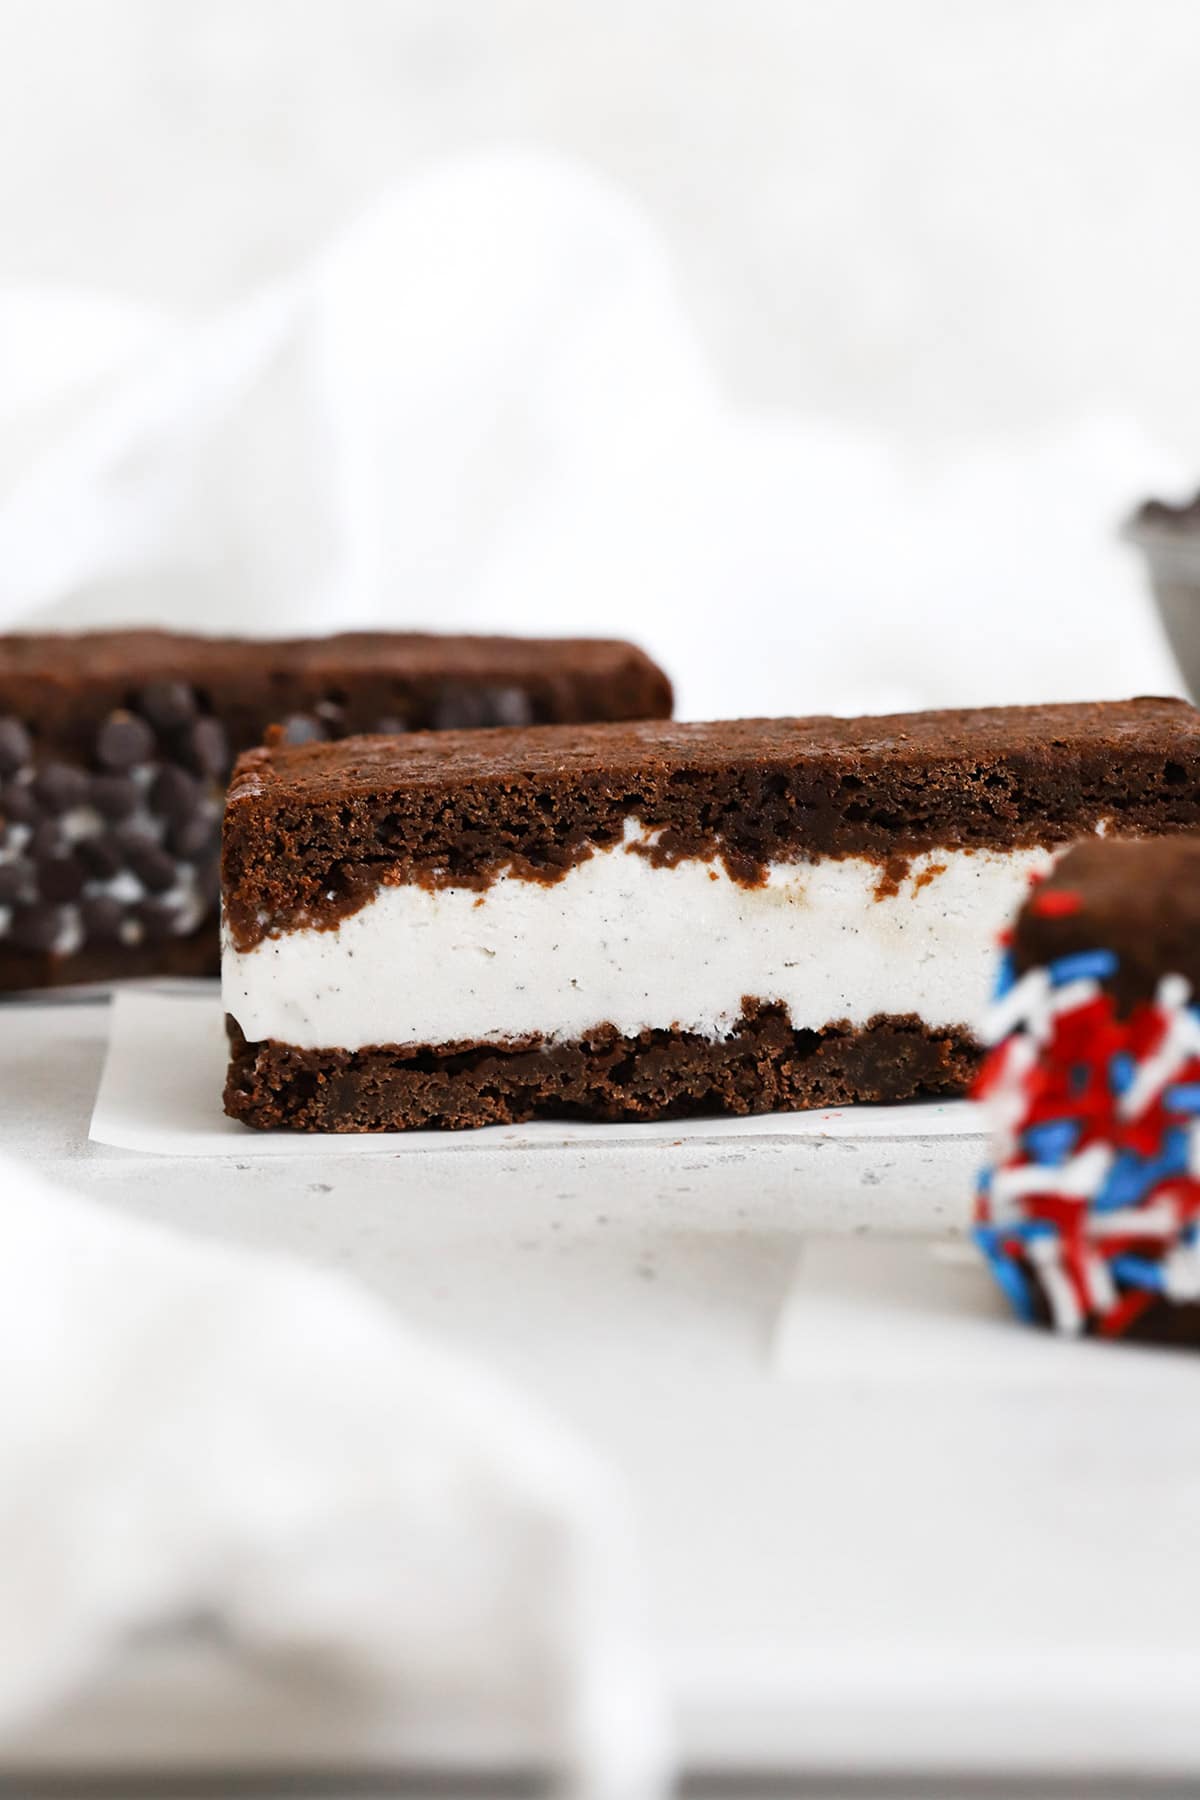 Three gluten-free brownie ice cream sandwiches on white background. One is rolled in chocolate chip and one is rolled in red, white, and blue sprinkles